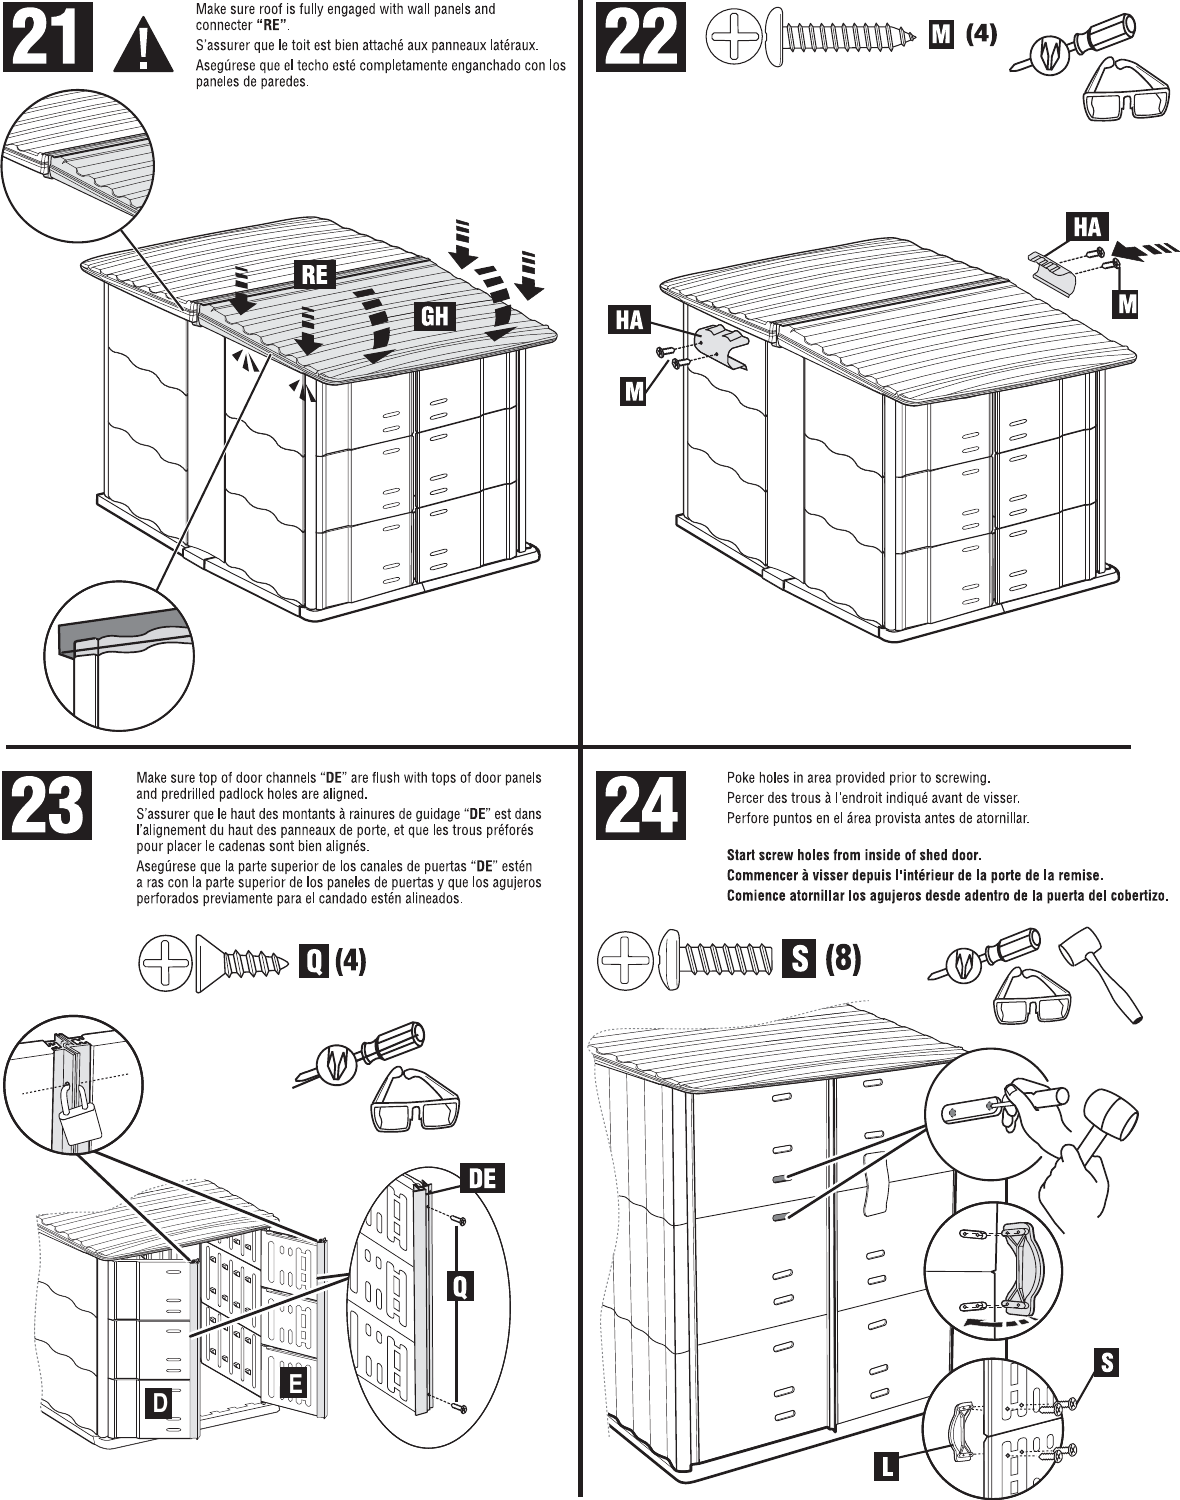 Page 7 of 8 - Rubbermaid Rubbermaid-Outdoor-Storage-3673-Users-Manual- 3673 Assembly  Rubbermaid-outdoor-storage-3673-users-manual